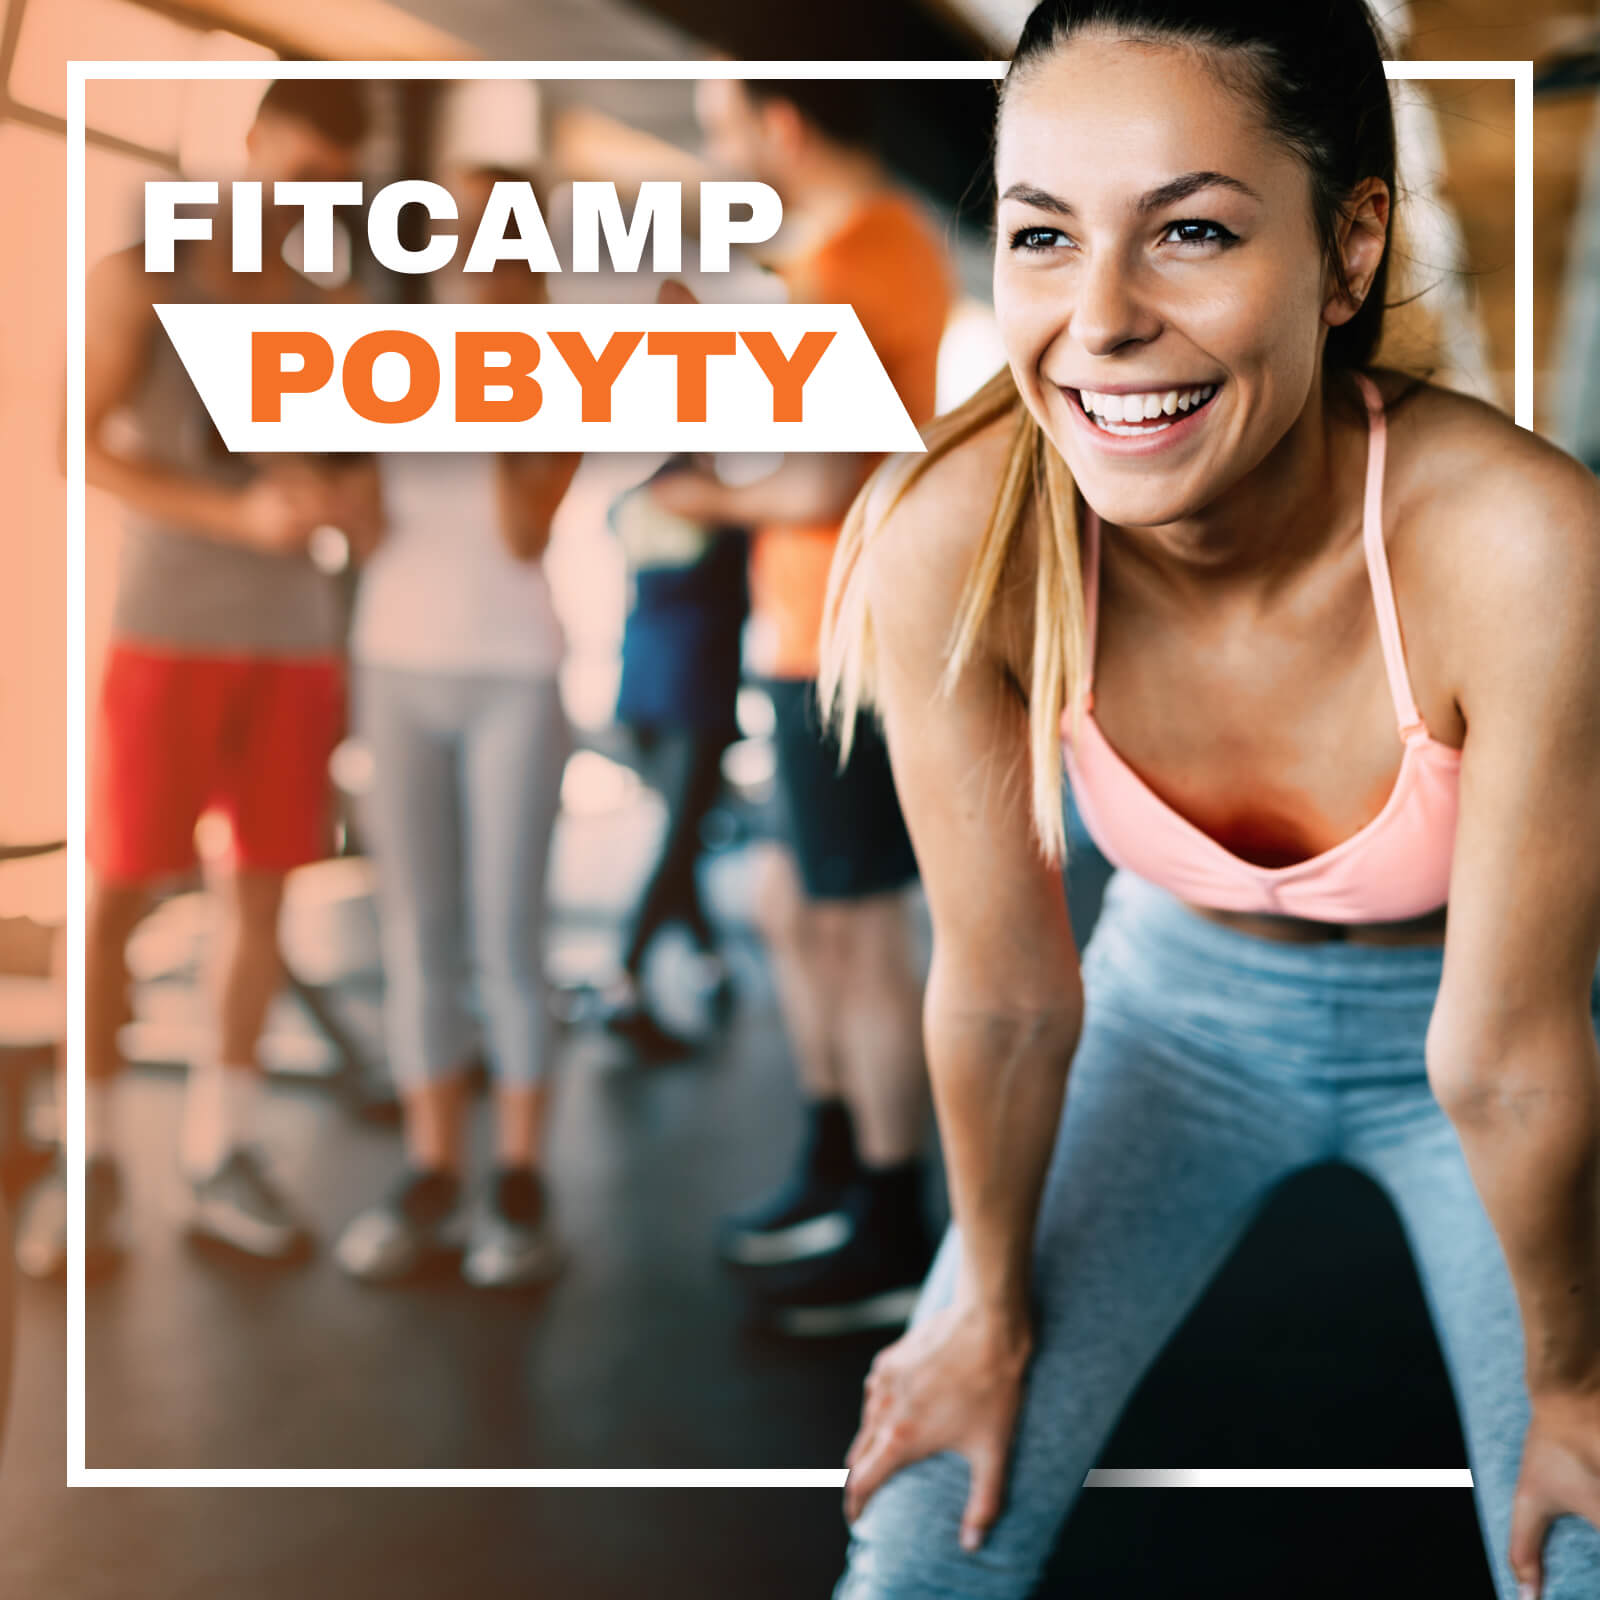 FitCamp pobyty